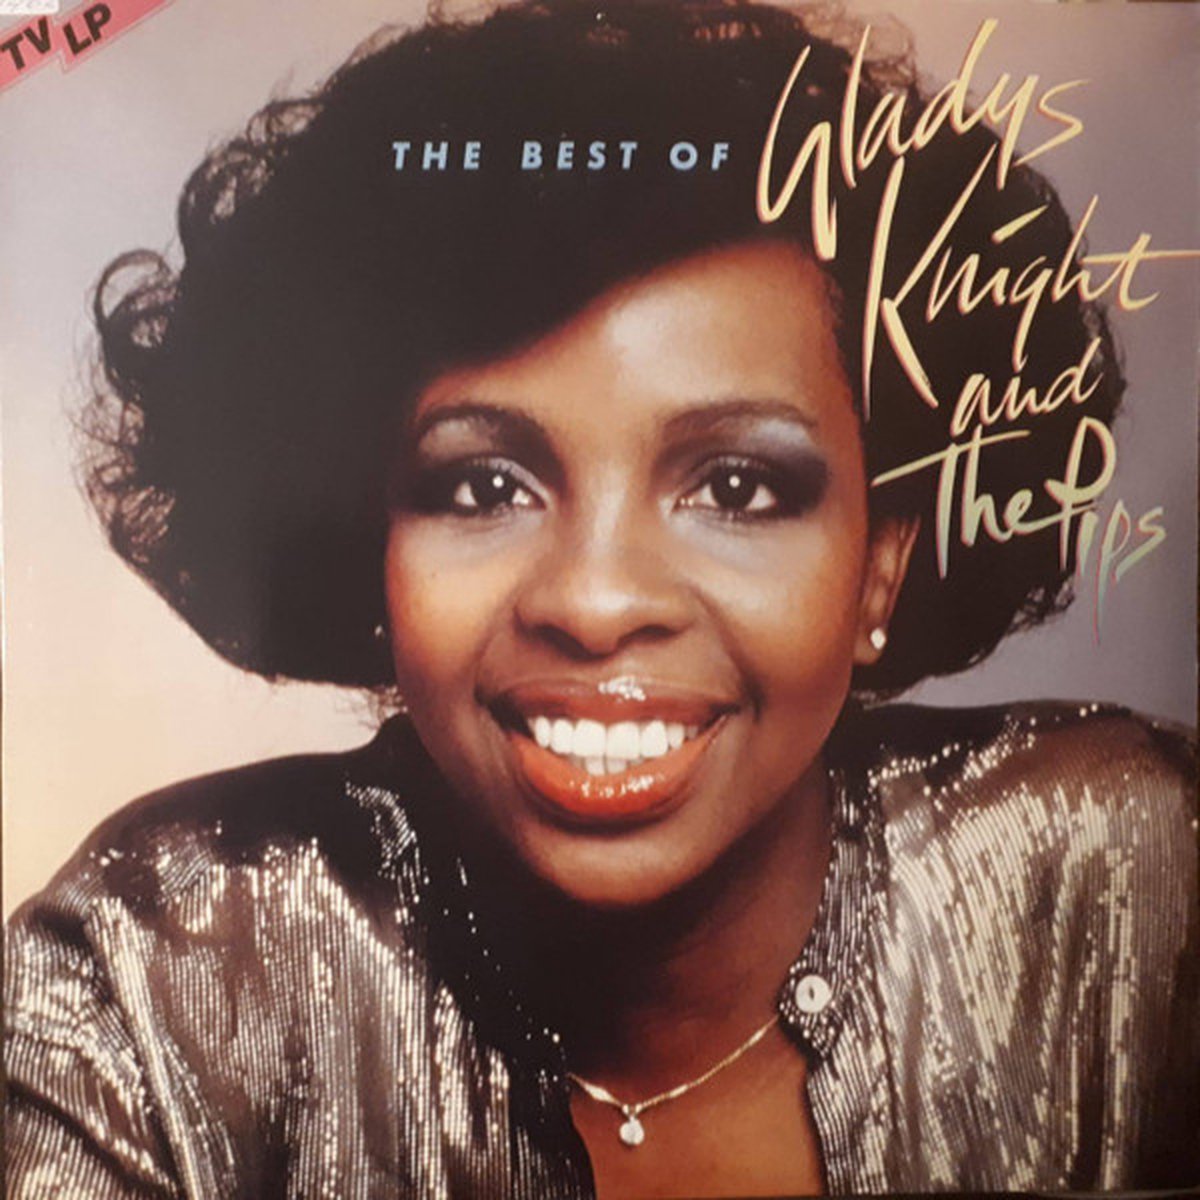 The Best of Gladys Knight and the Pips (LP) - Gladys Knight and The Pips